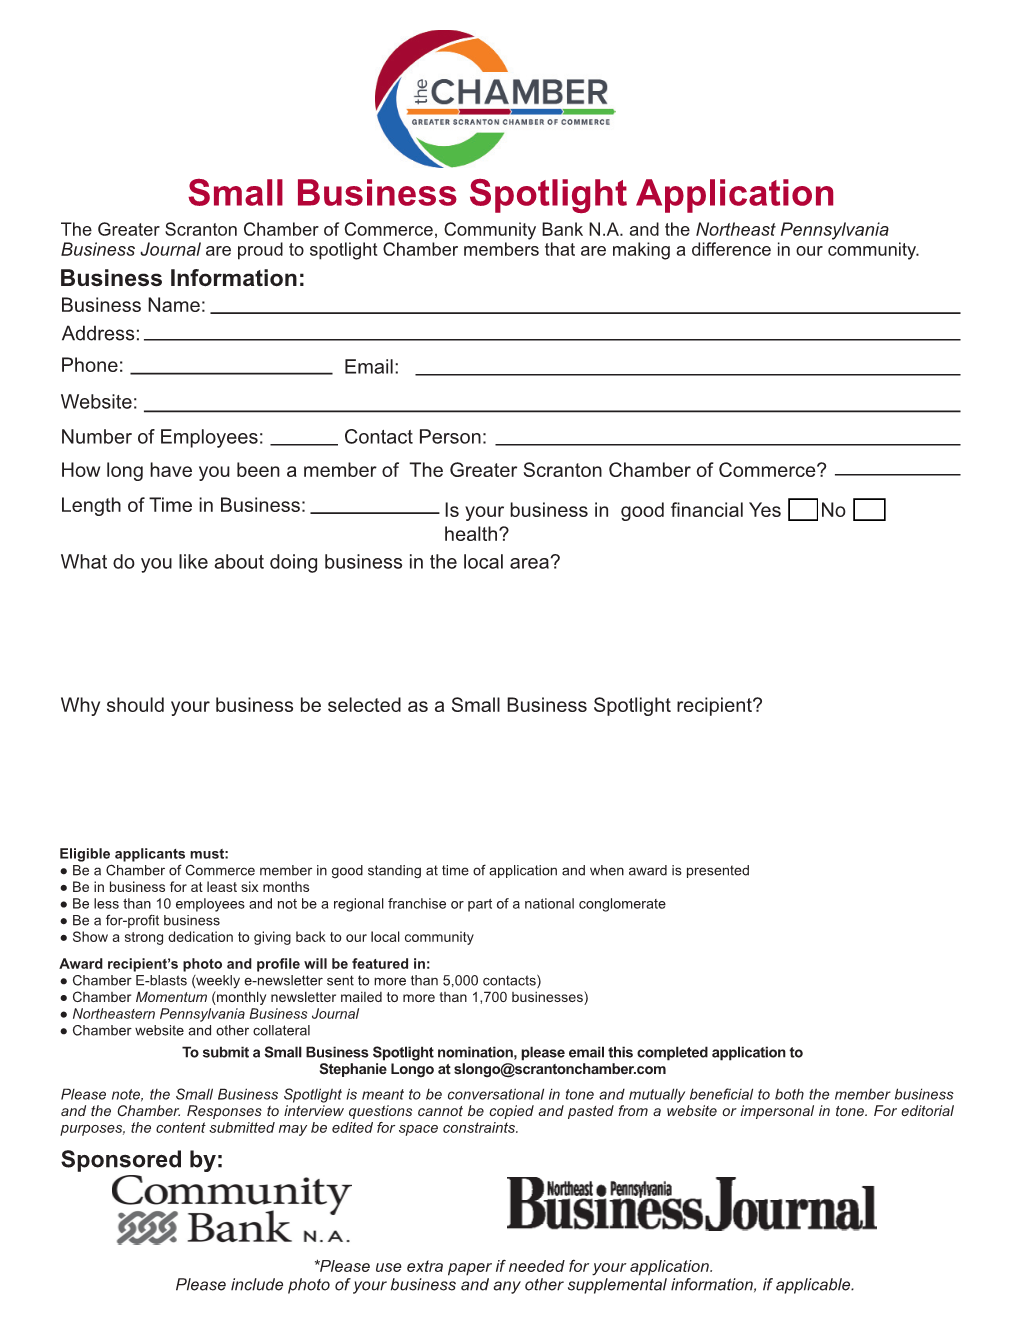 Small Business Spotlight Application the Greater Scranton Chamber of Commerce, Community Bank N.A